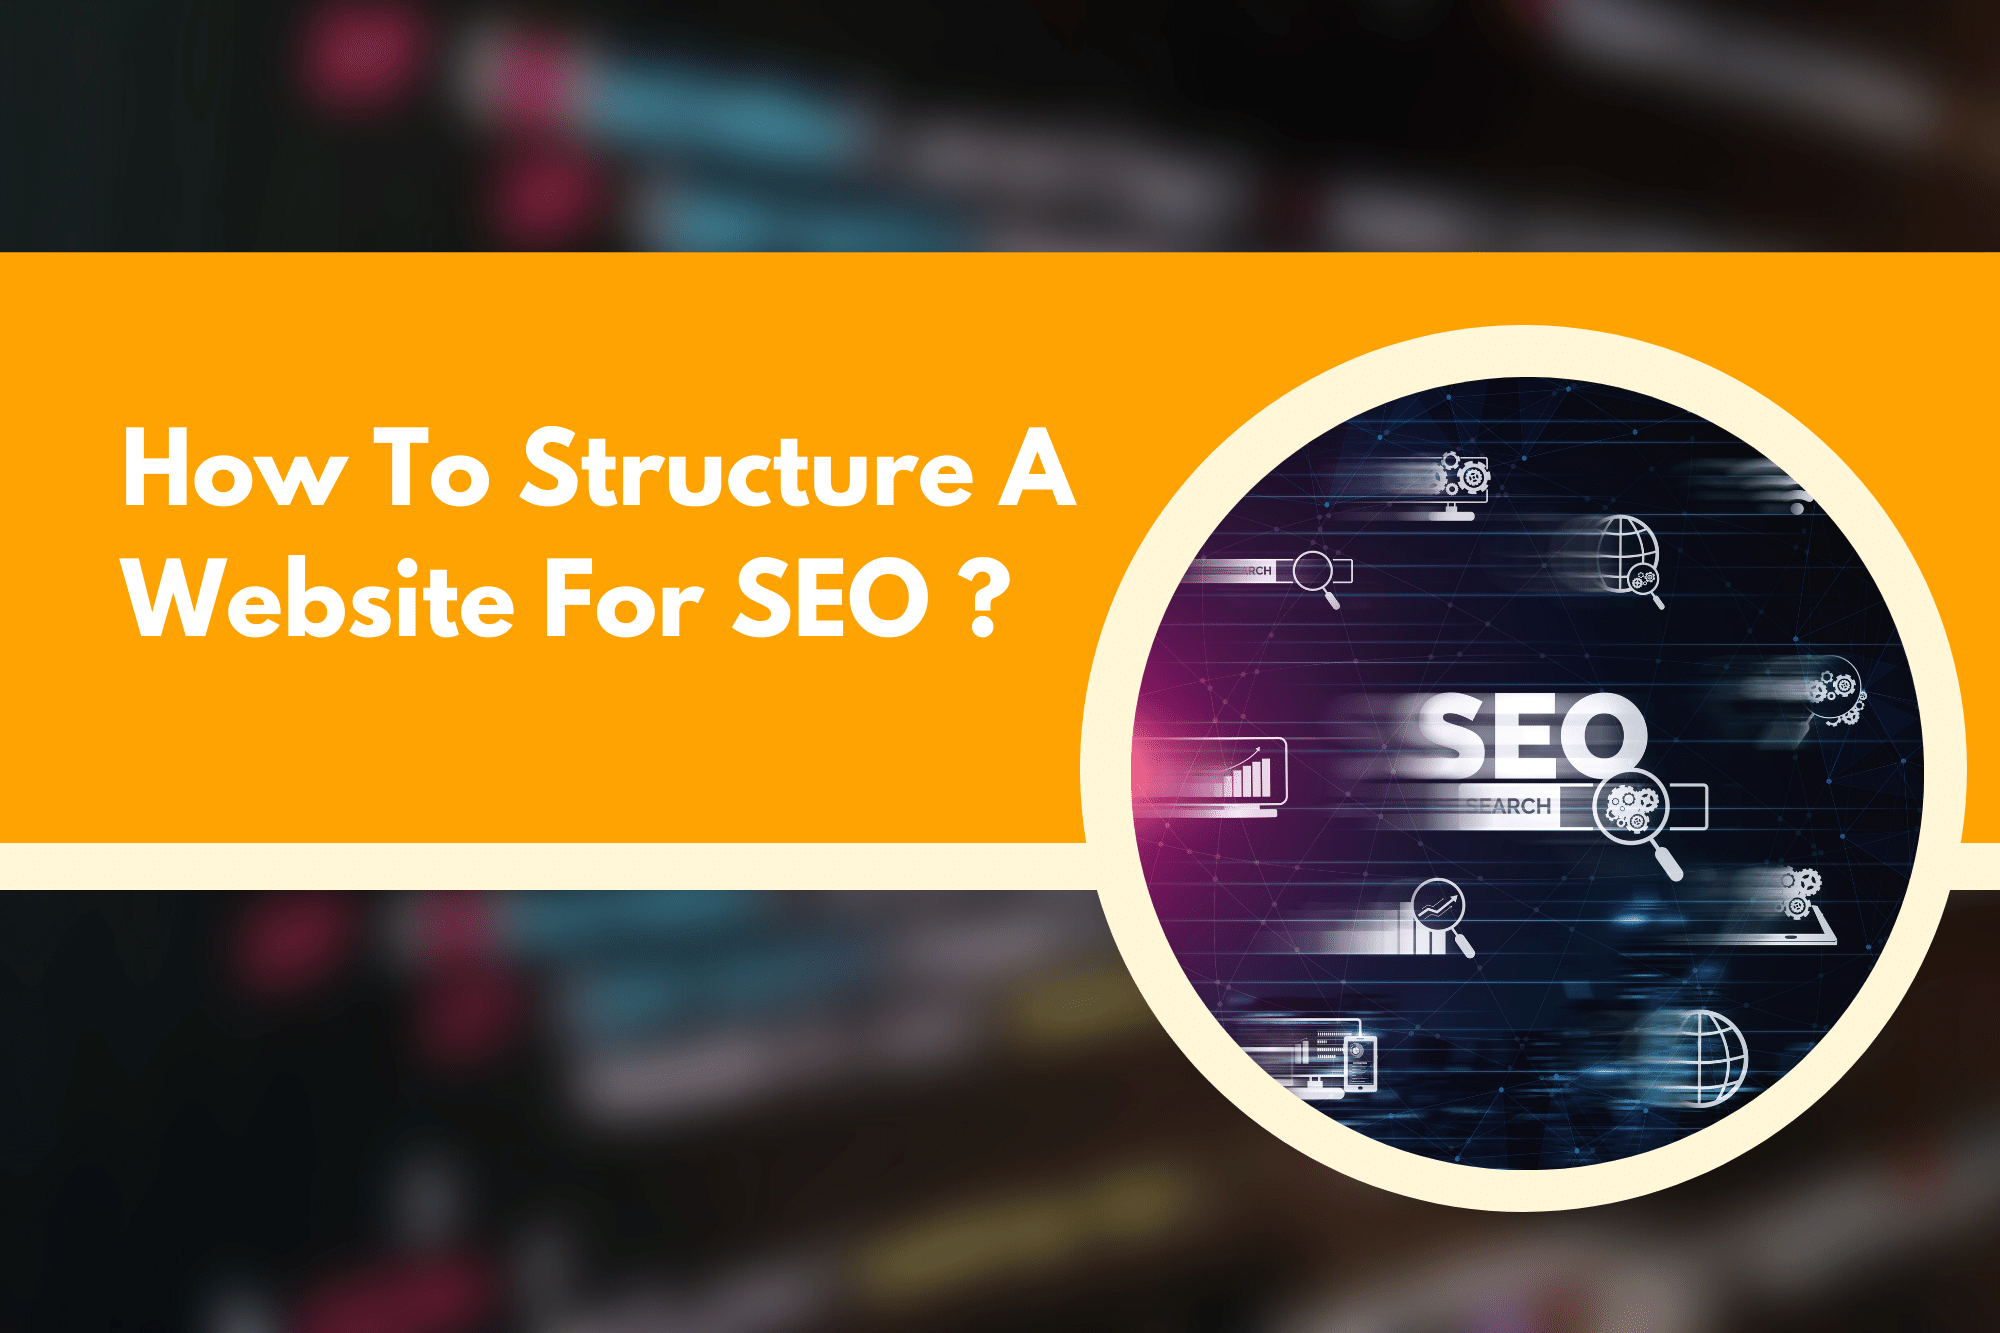 How To Structure A Website For SEO